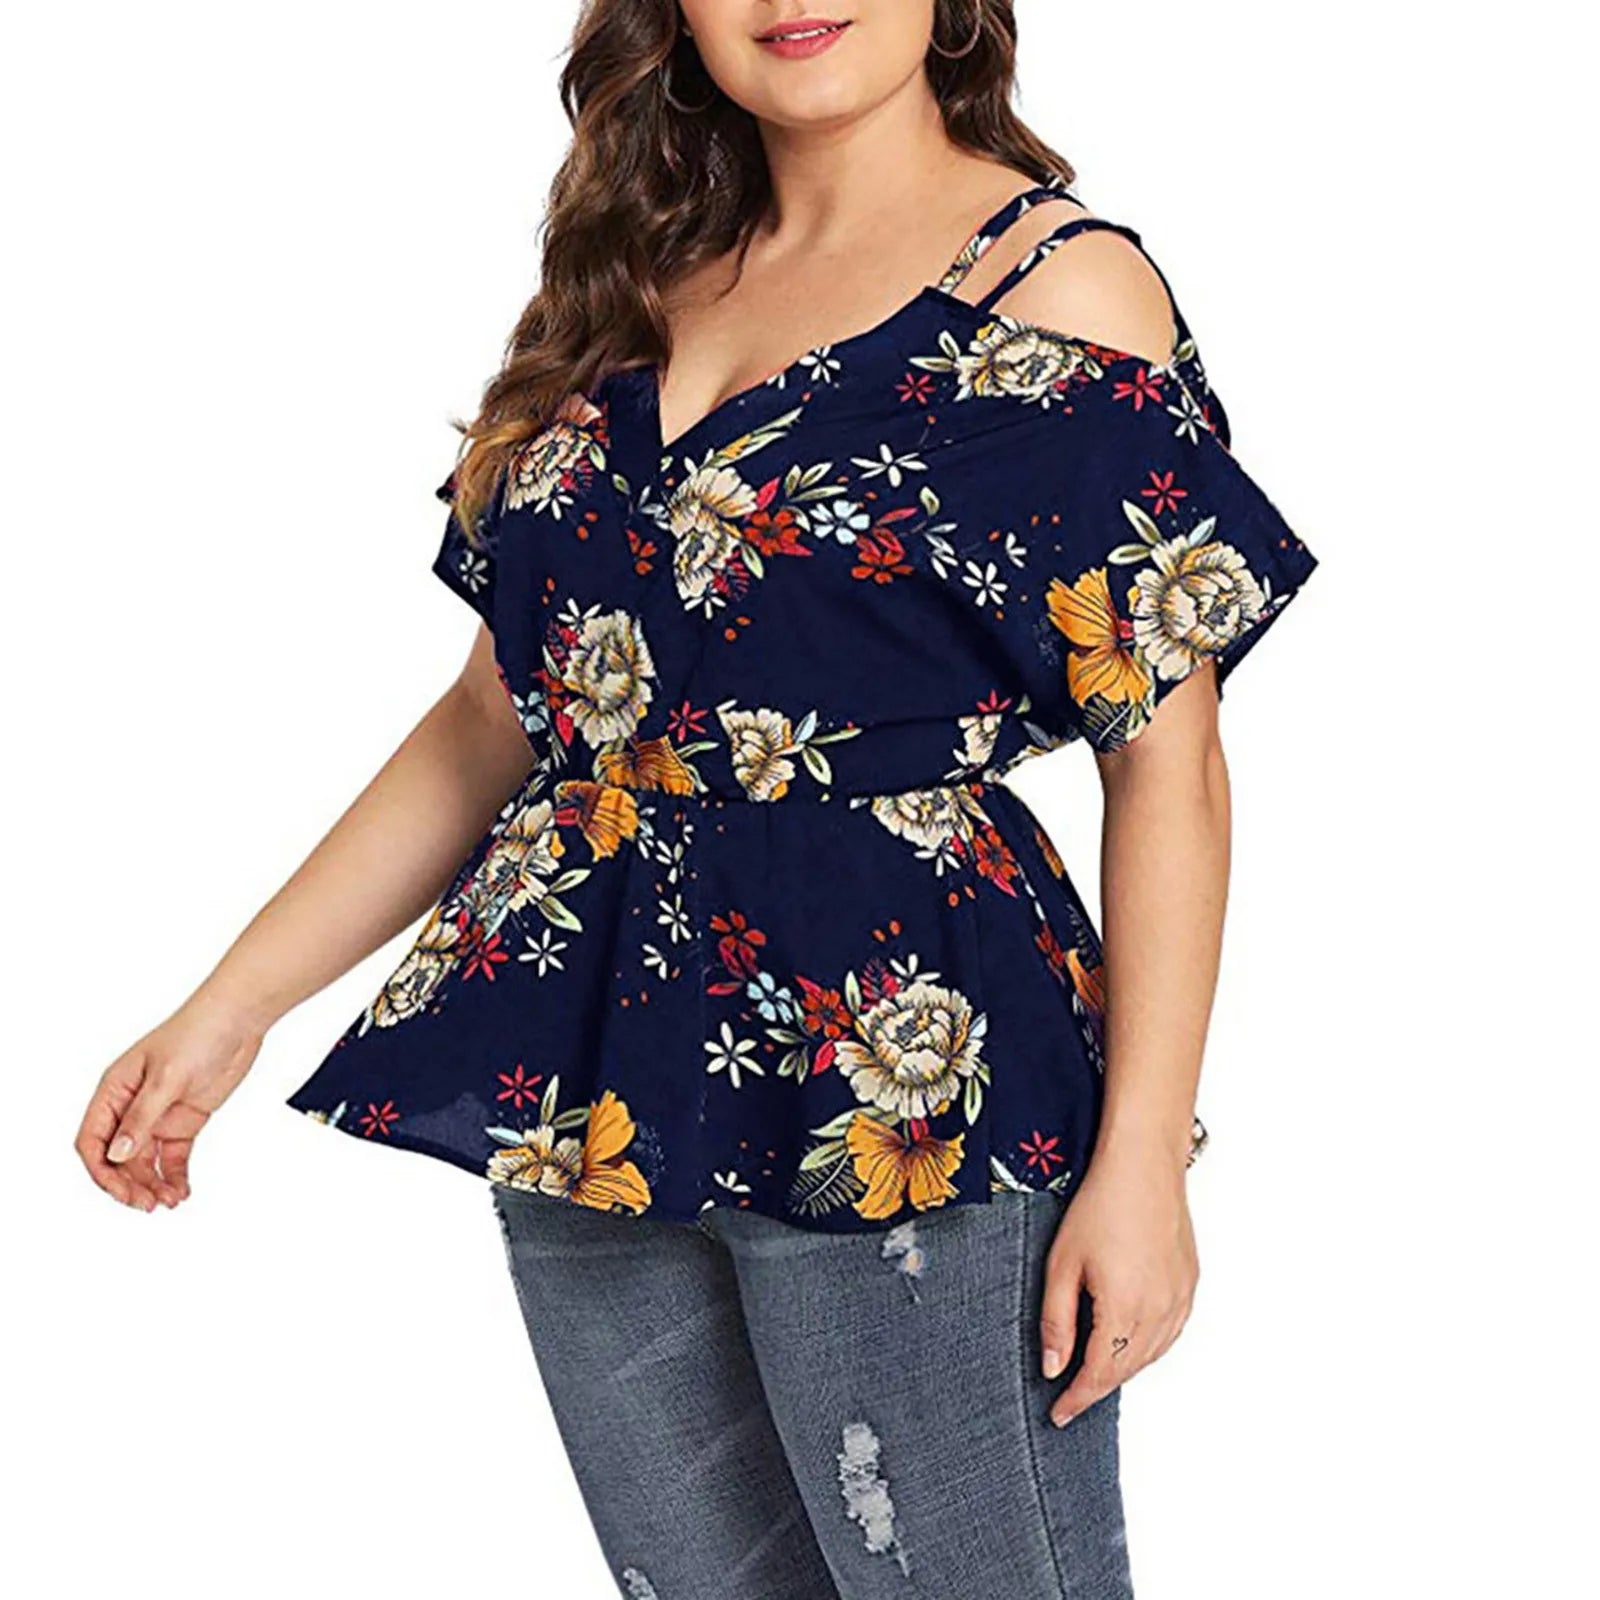 Women Floral Print Tops And Blouses Sexy Off Shoulder Tunic Shirt